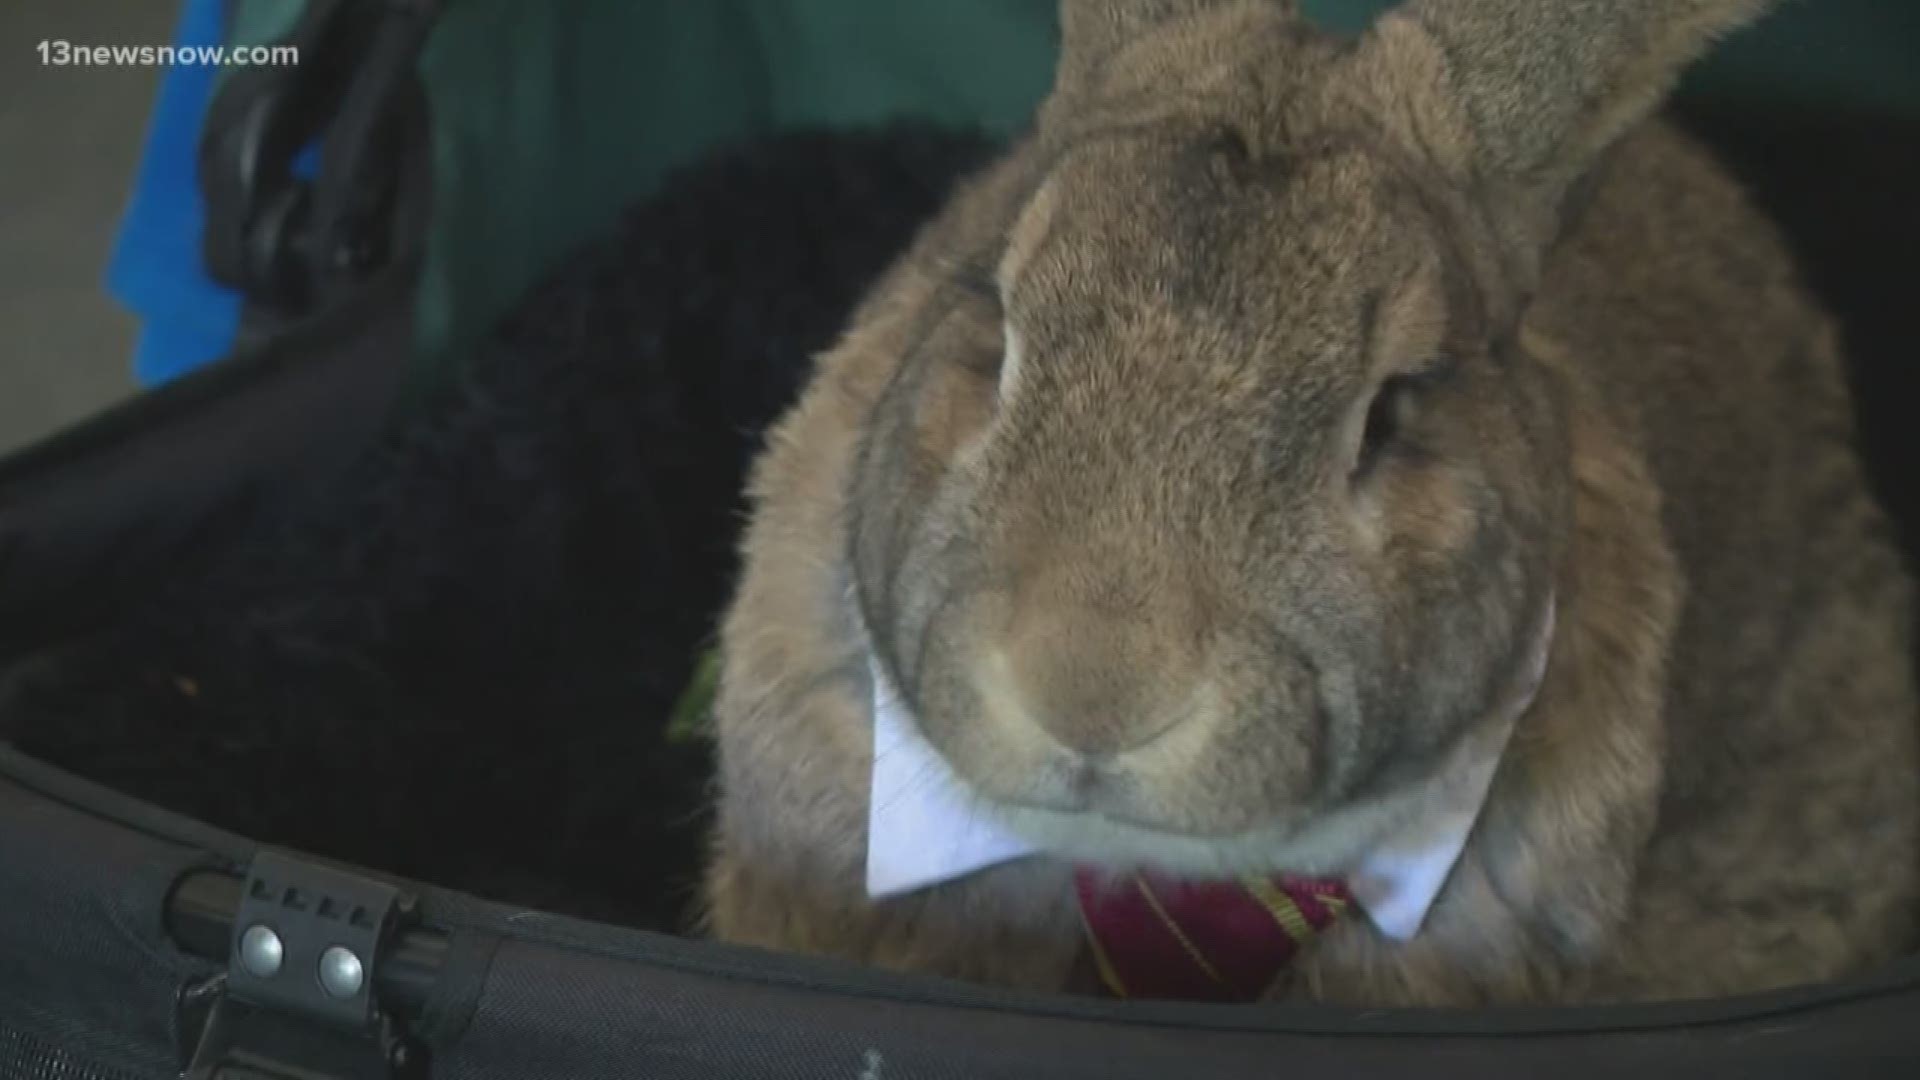 America's biggest bunny that lives in Virginia Beach is 'running for president'